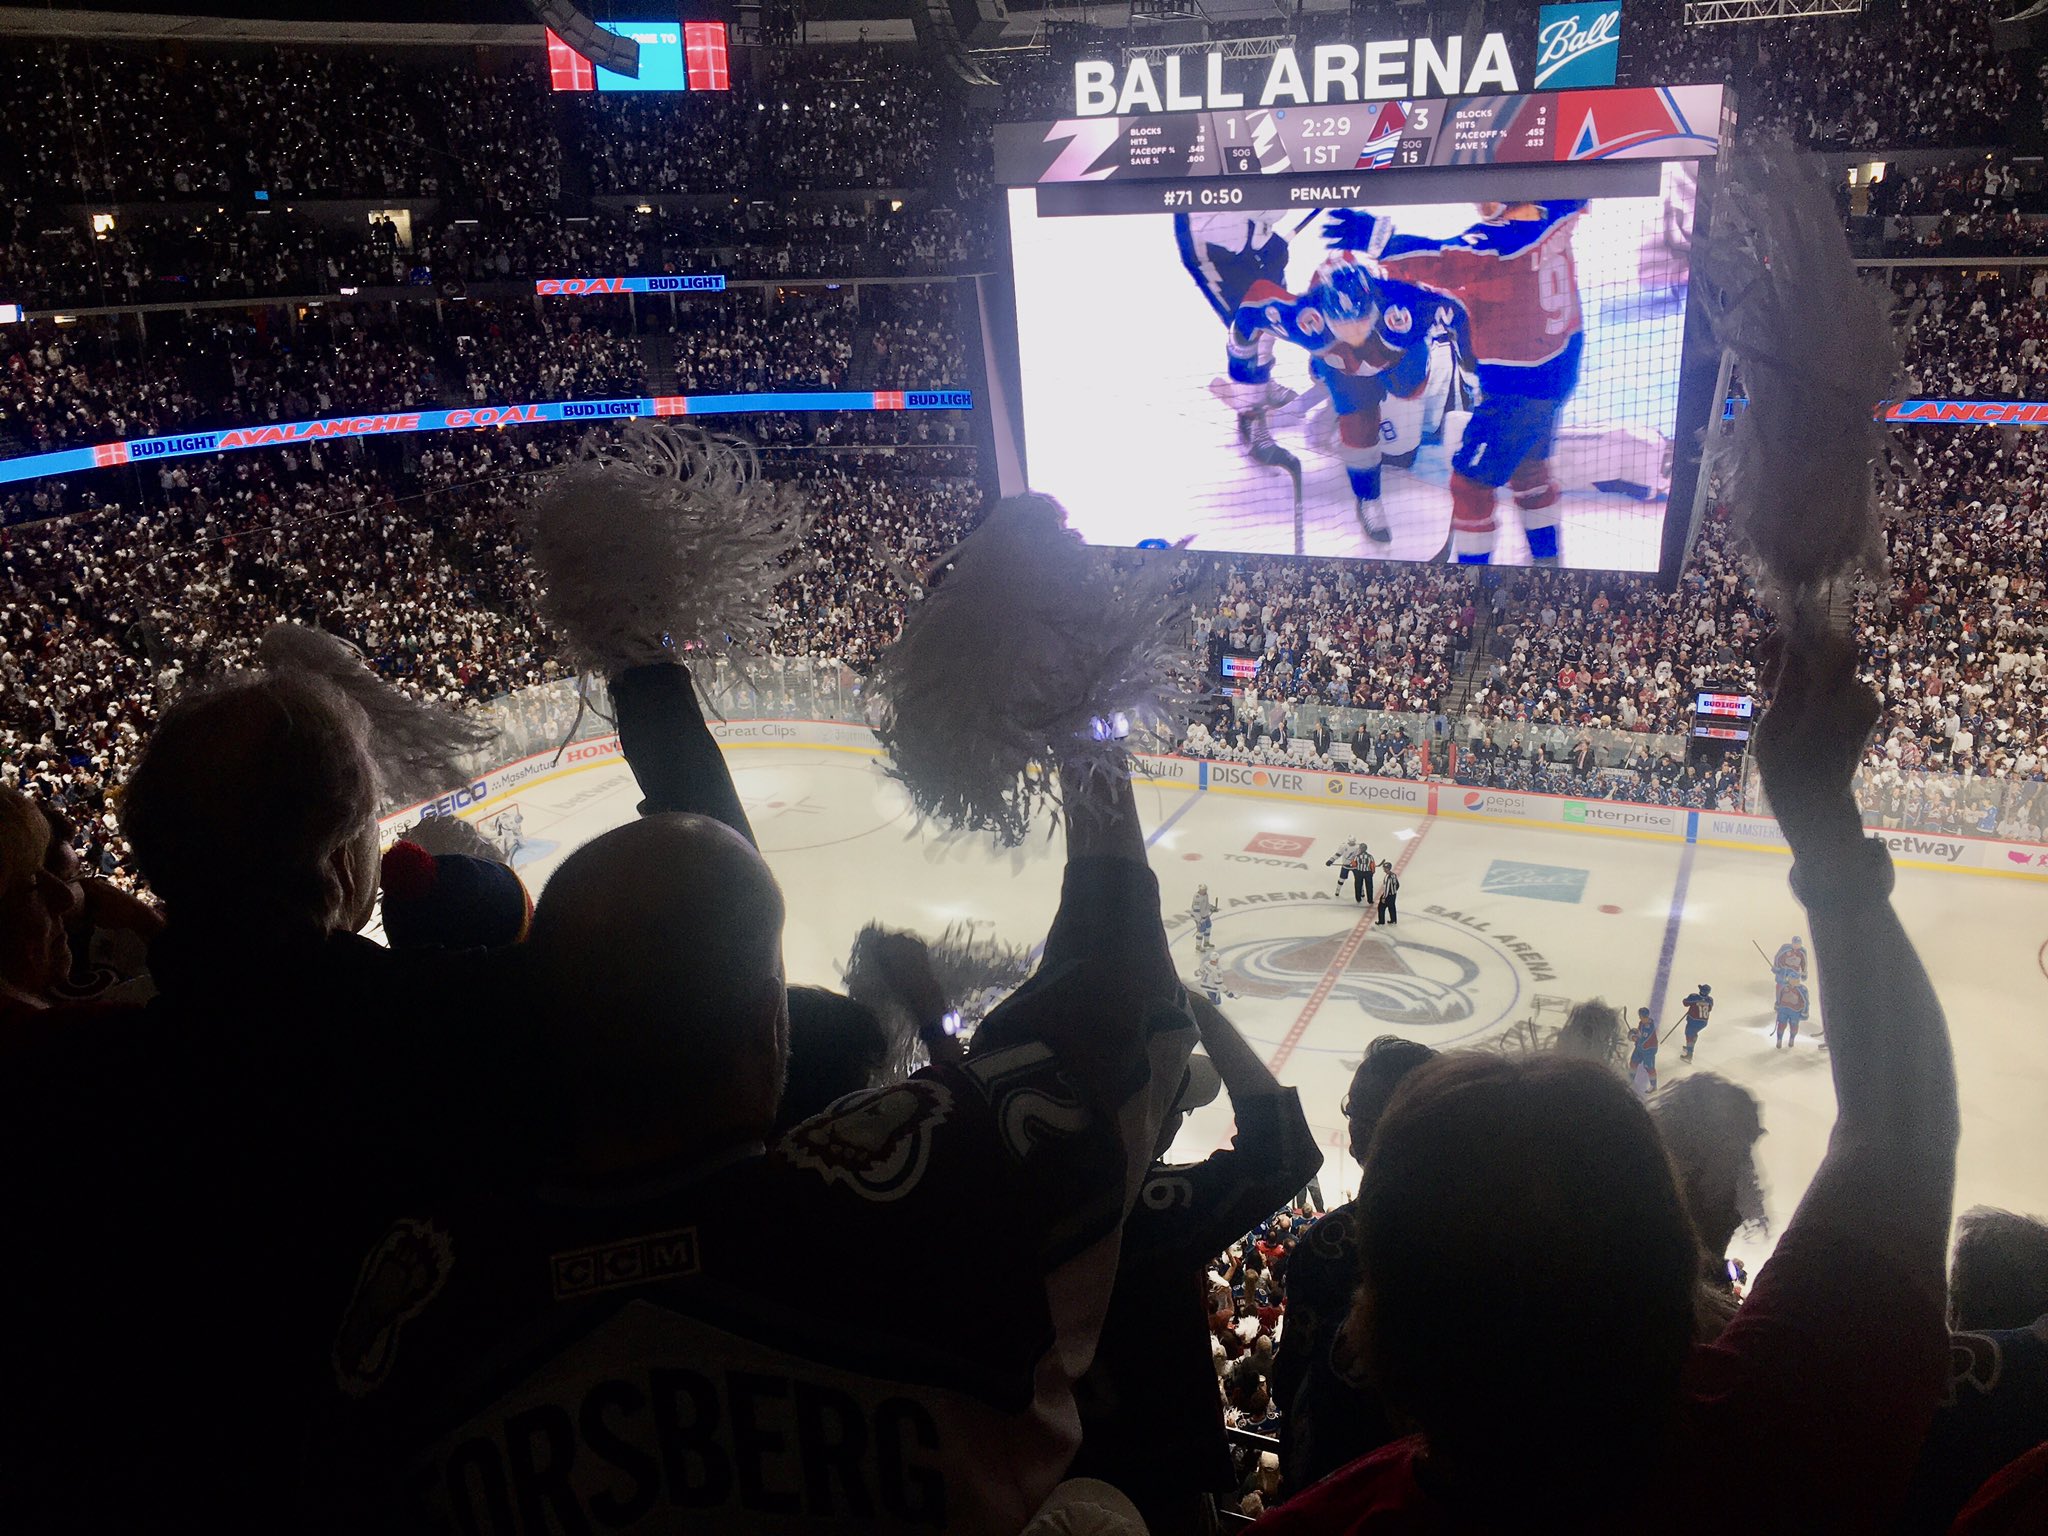 Fans cheer on Bolts from Amalie Arena watch party